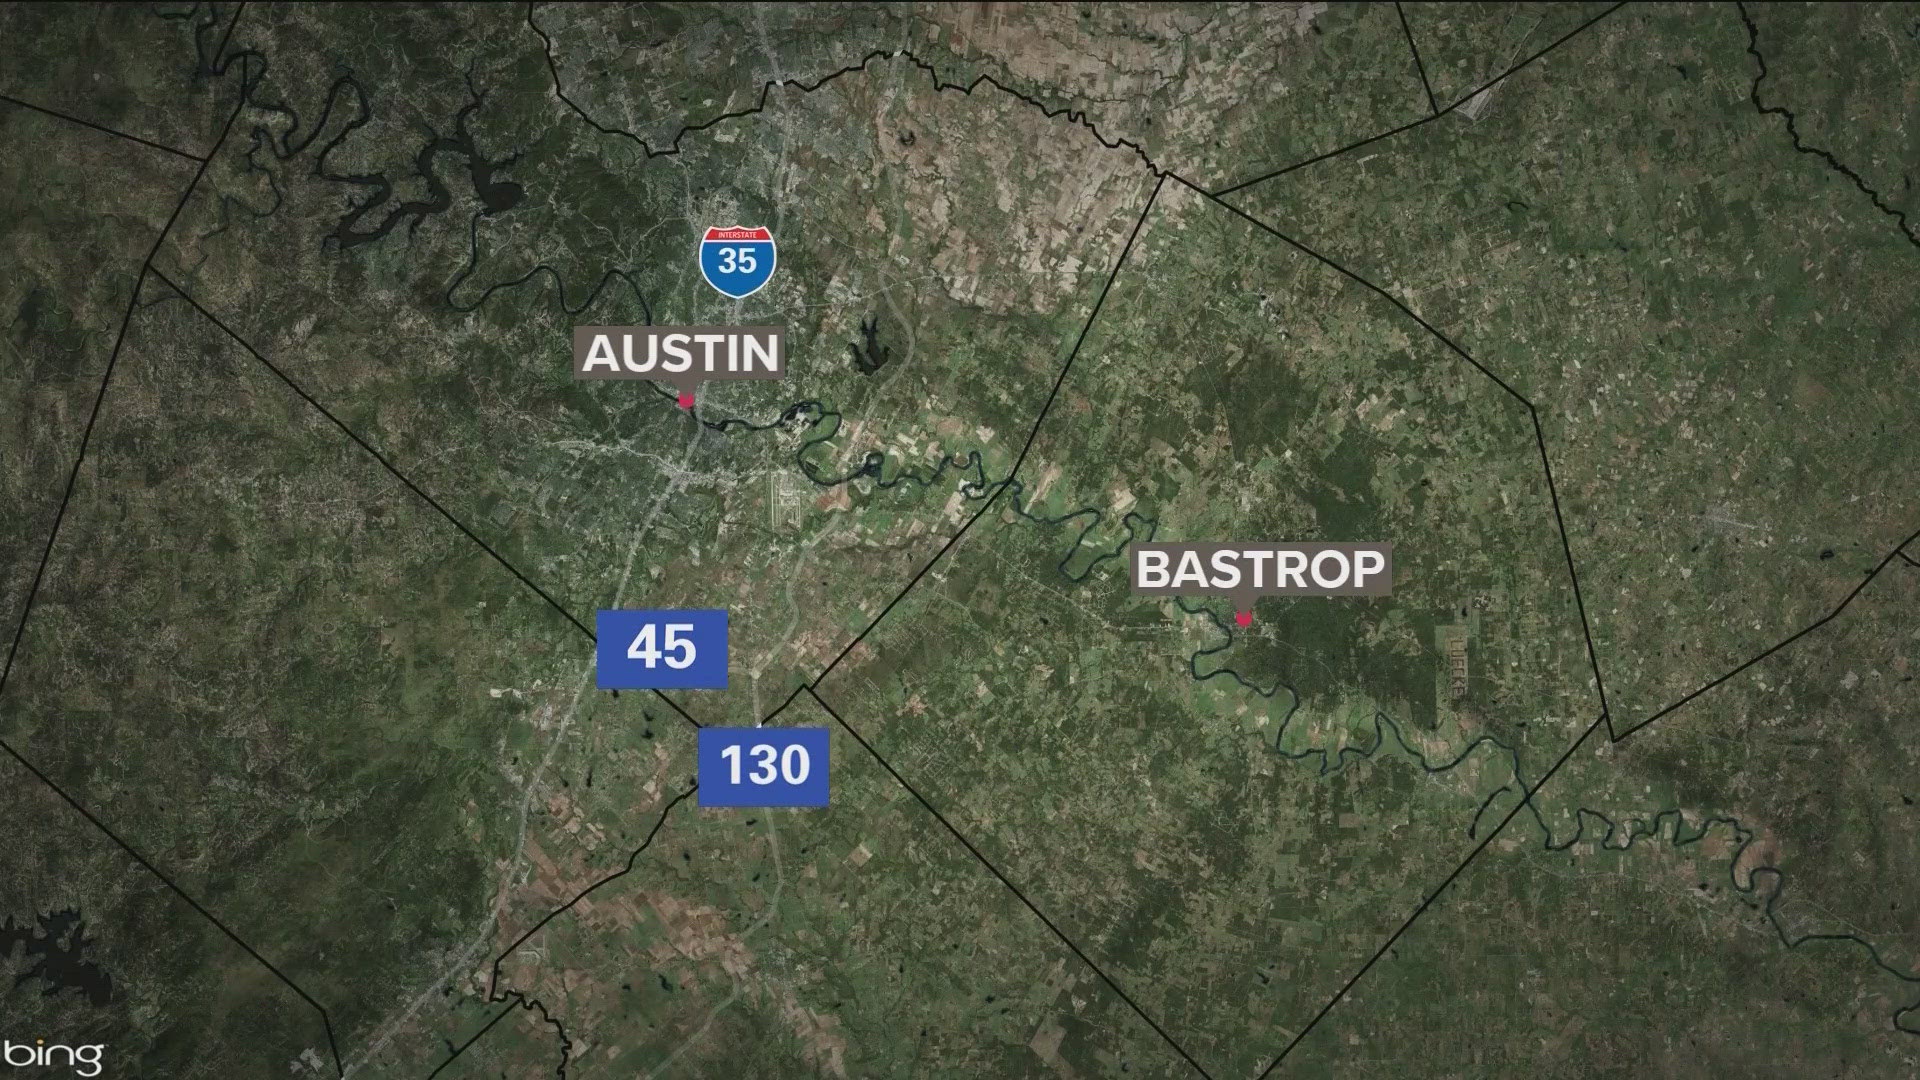 Officials with the Bastrop Police Department said someone reported a man struggling in the water near Fisherman's Park.